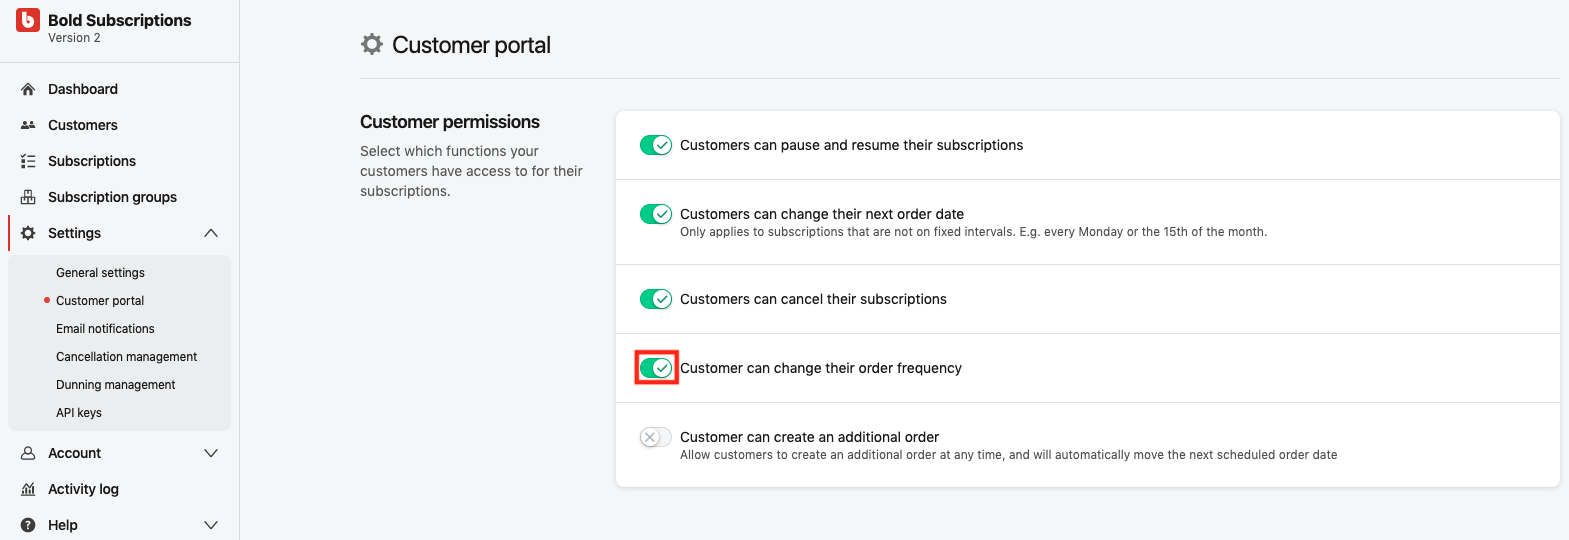 Select toggle beside Customer can change their order frequency